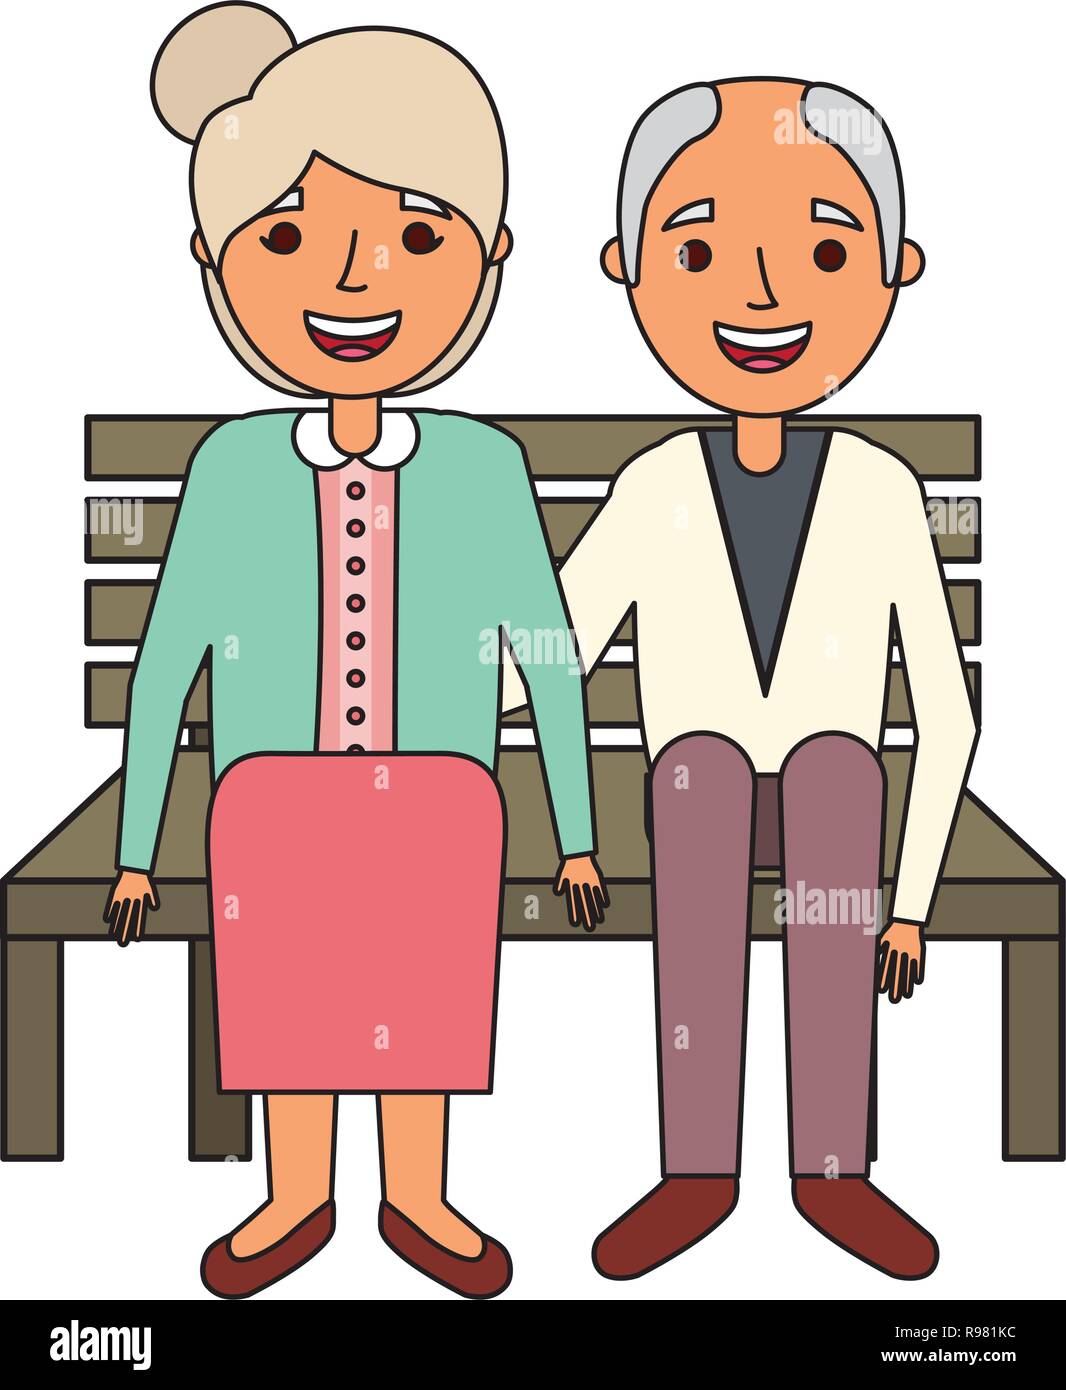 Elderly people sitting on bench Cut Out Stock Images & Pictures - Alamy